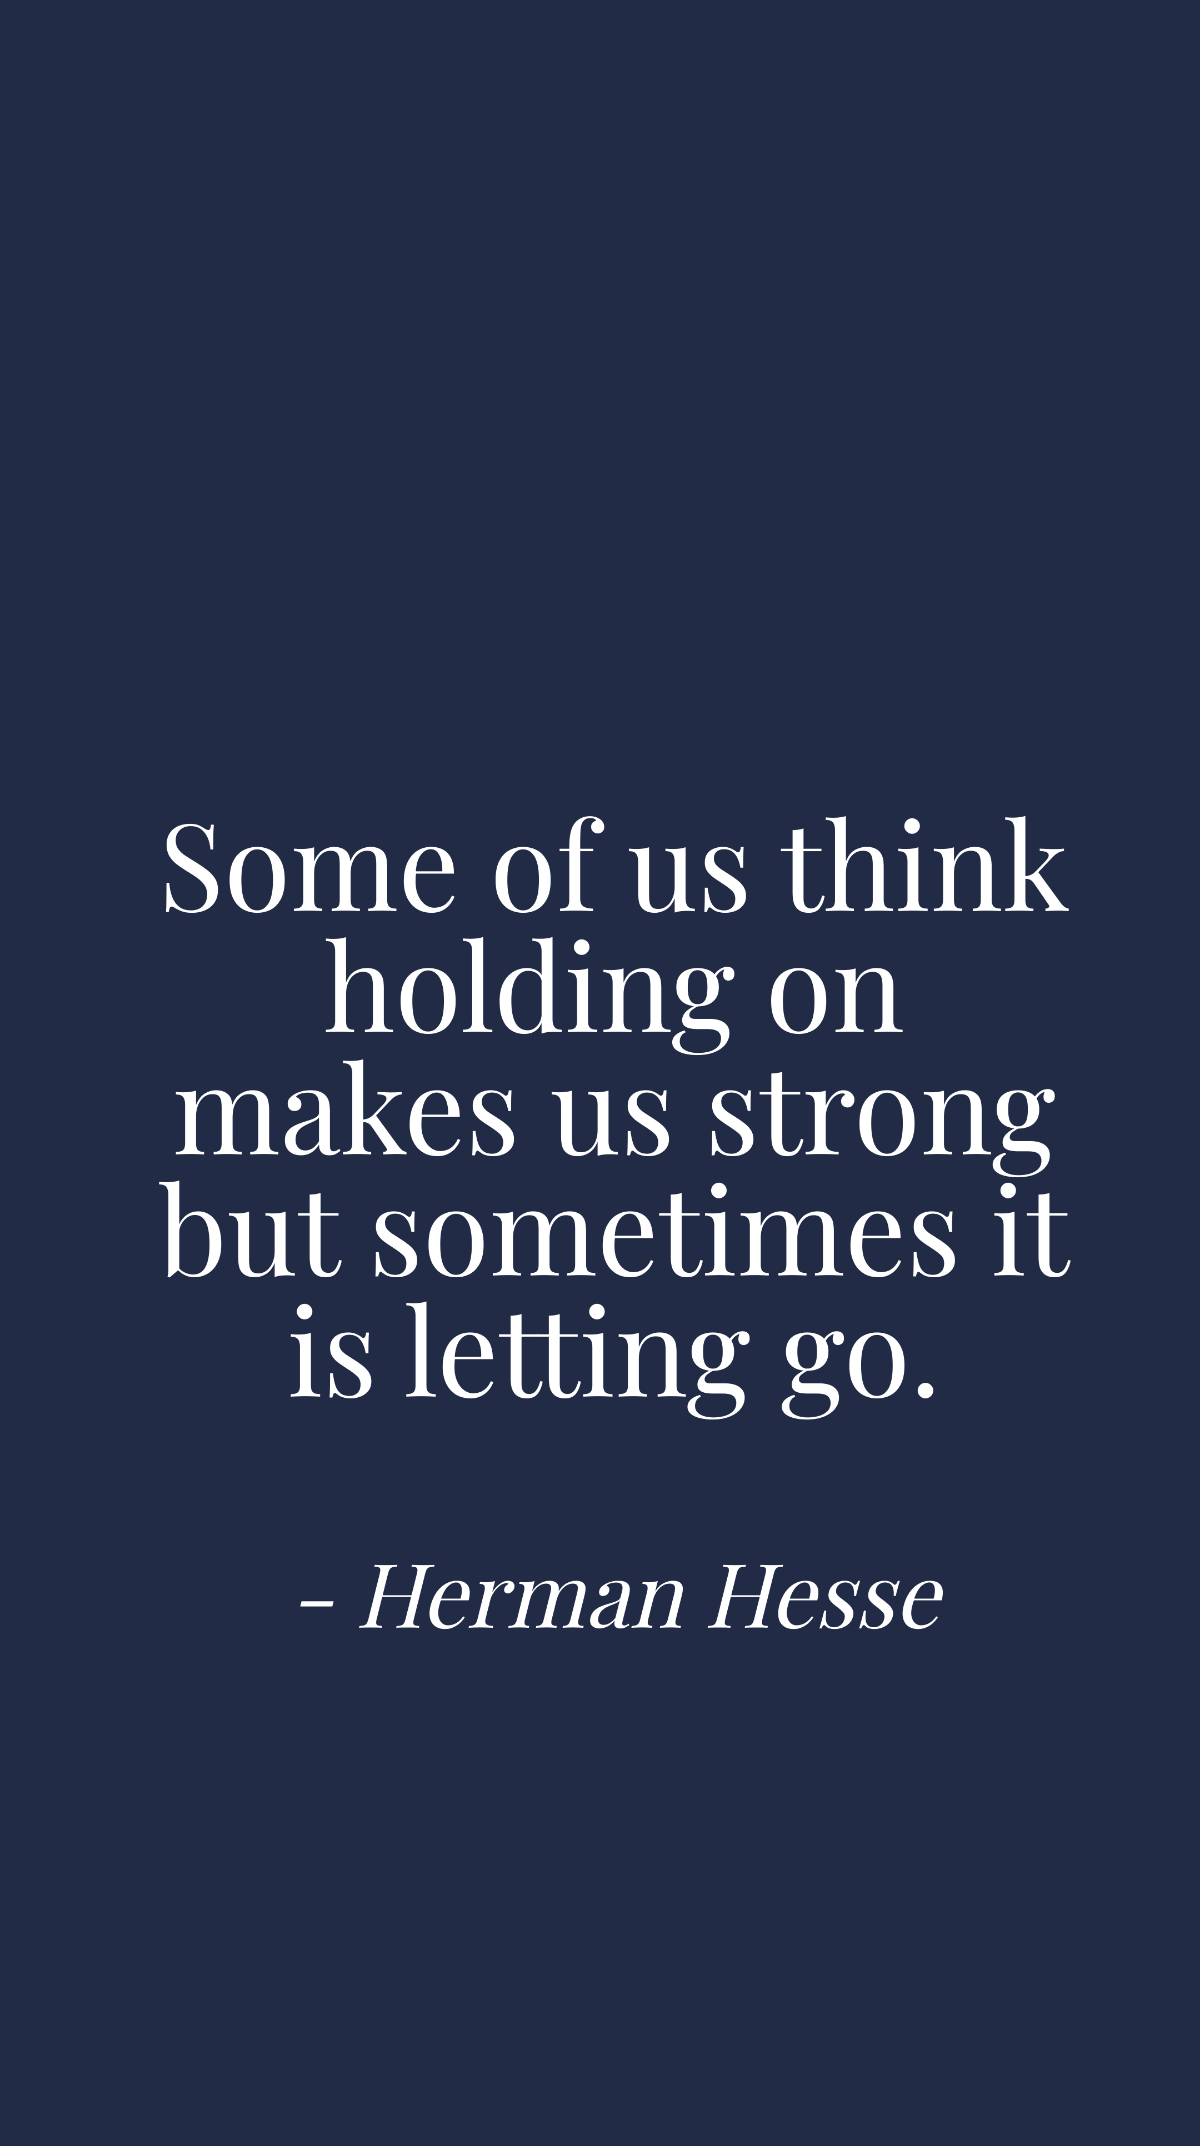 Herman Hesse - Some of us think holding on makes us strong but sometimes it is letting go.